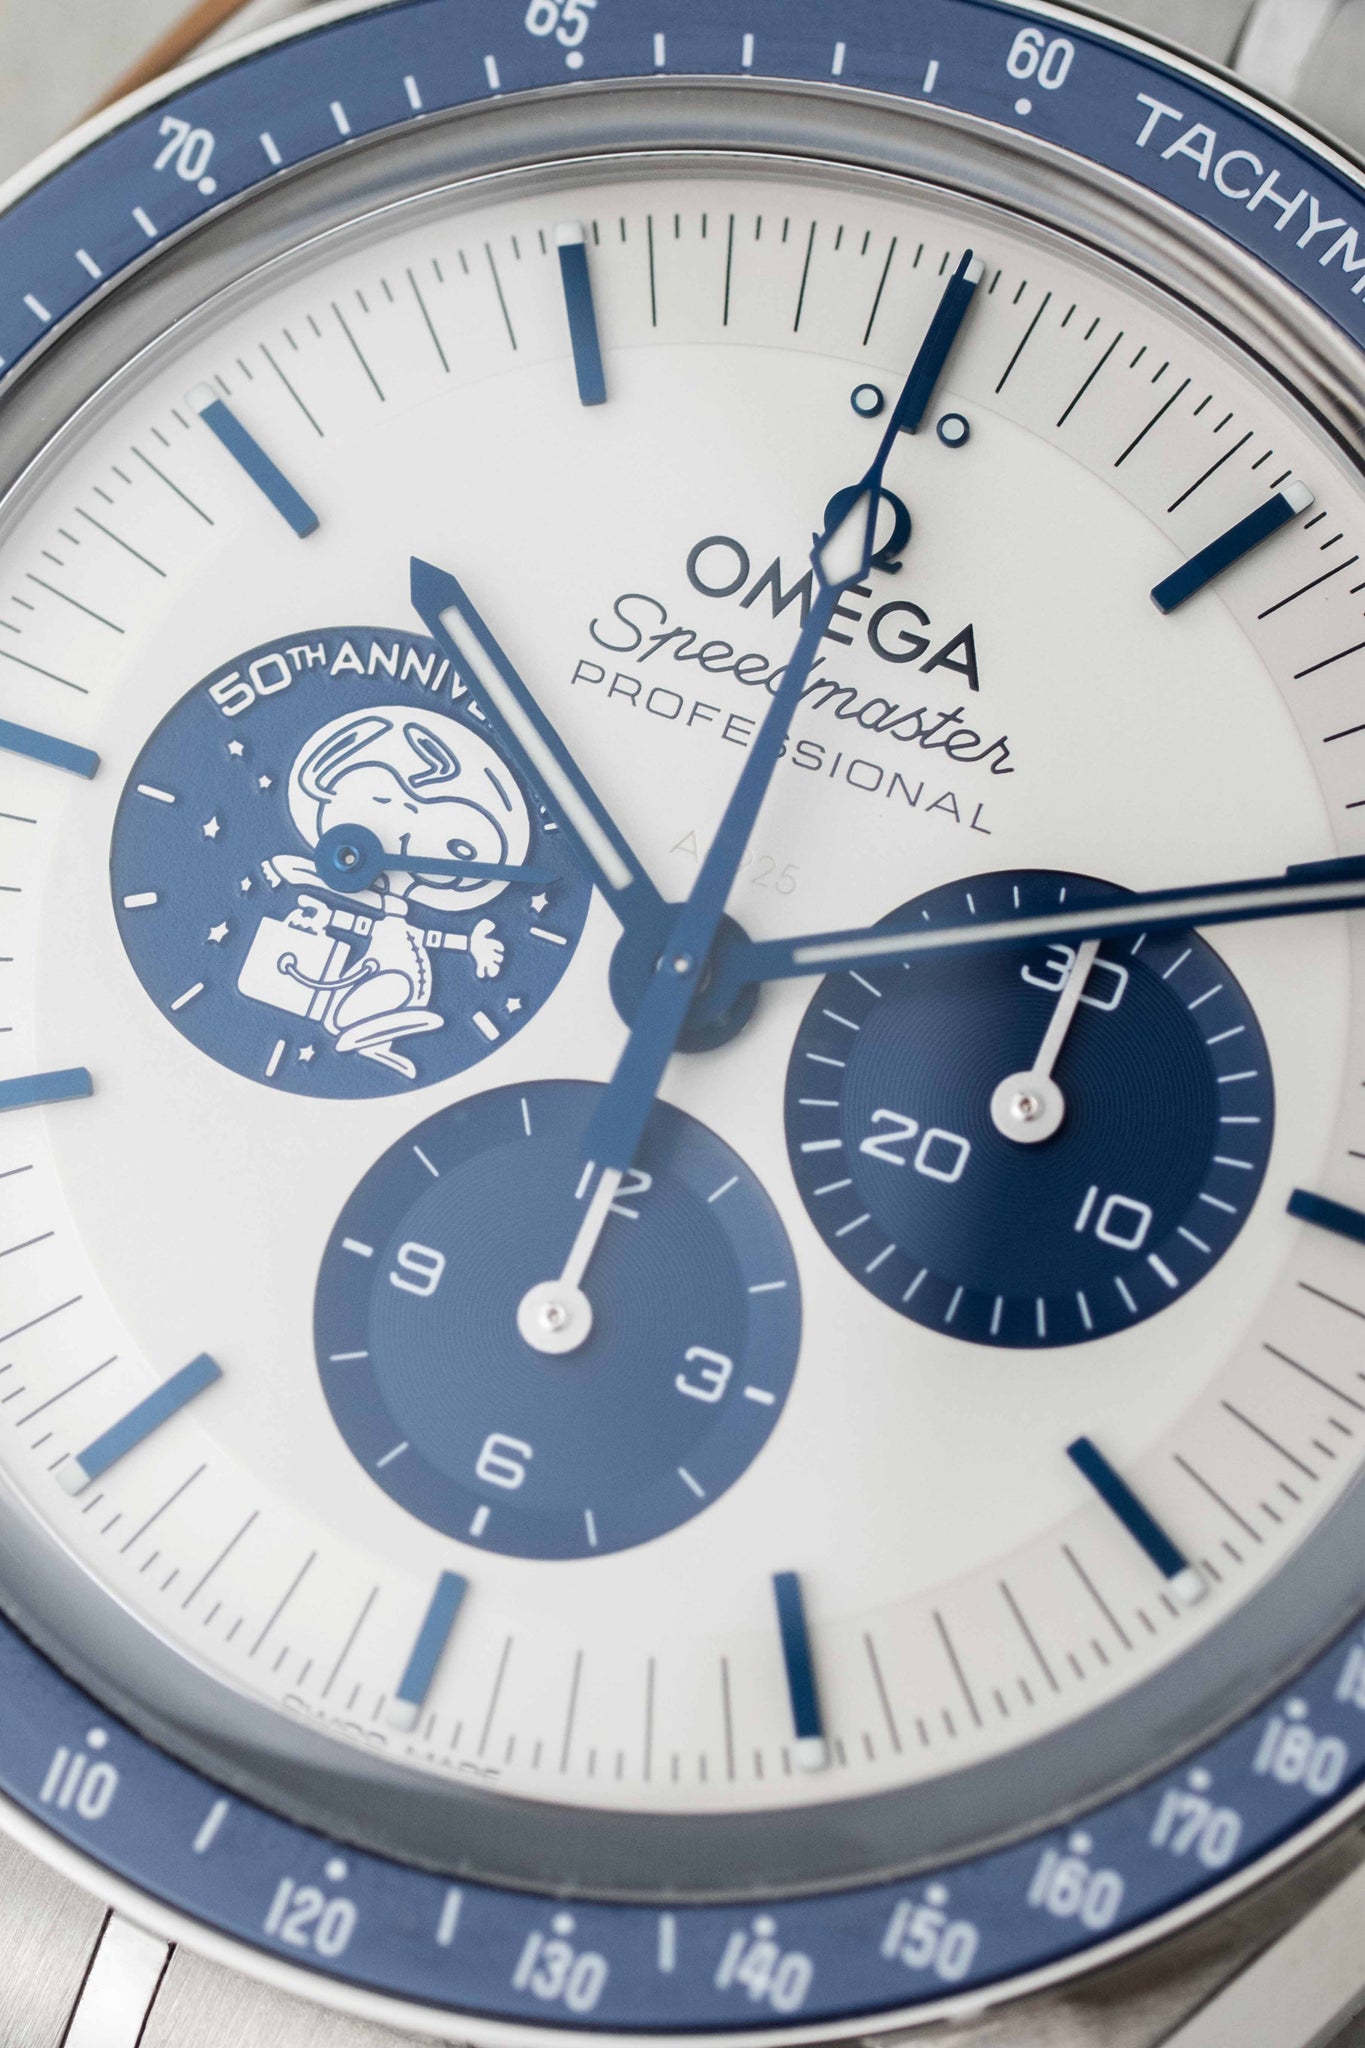 Omega Speedmaster 'Snoopy' Ref. 310.32.42.50.02.001 w/ Box & Papers 2023